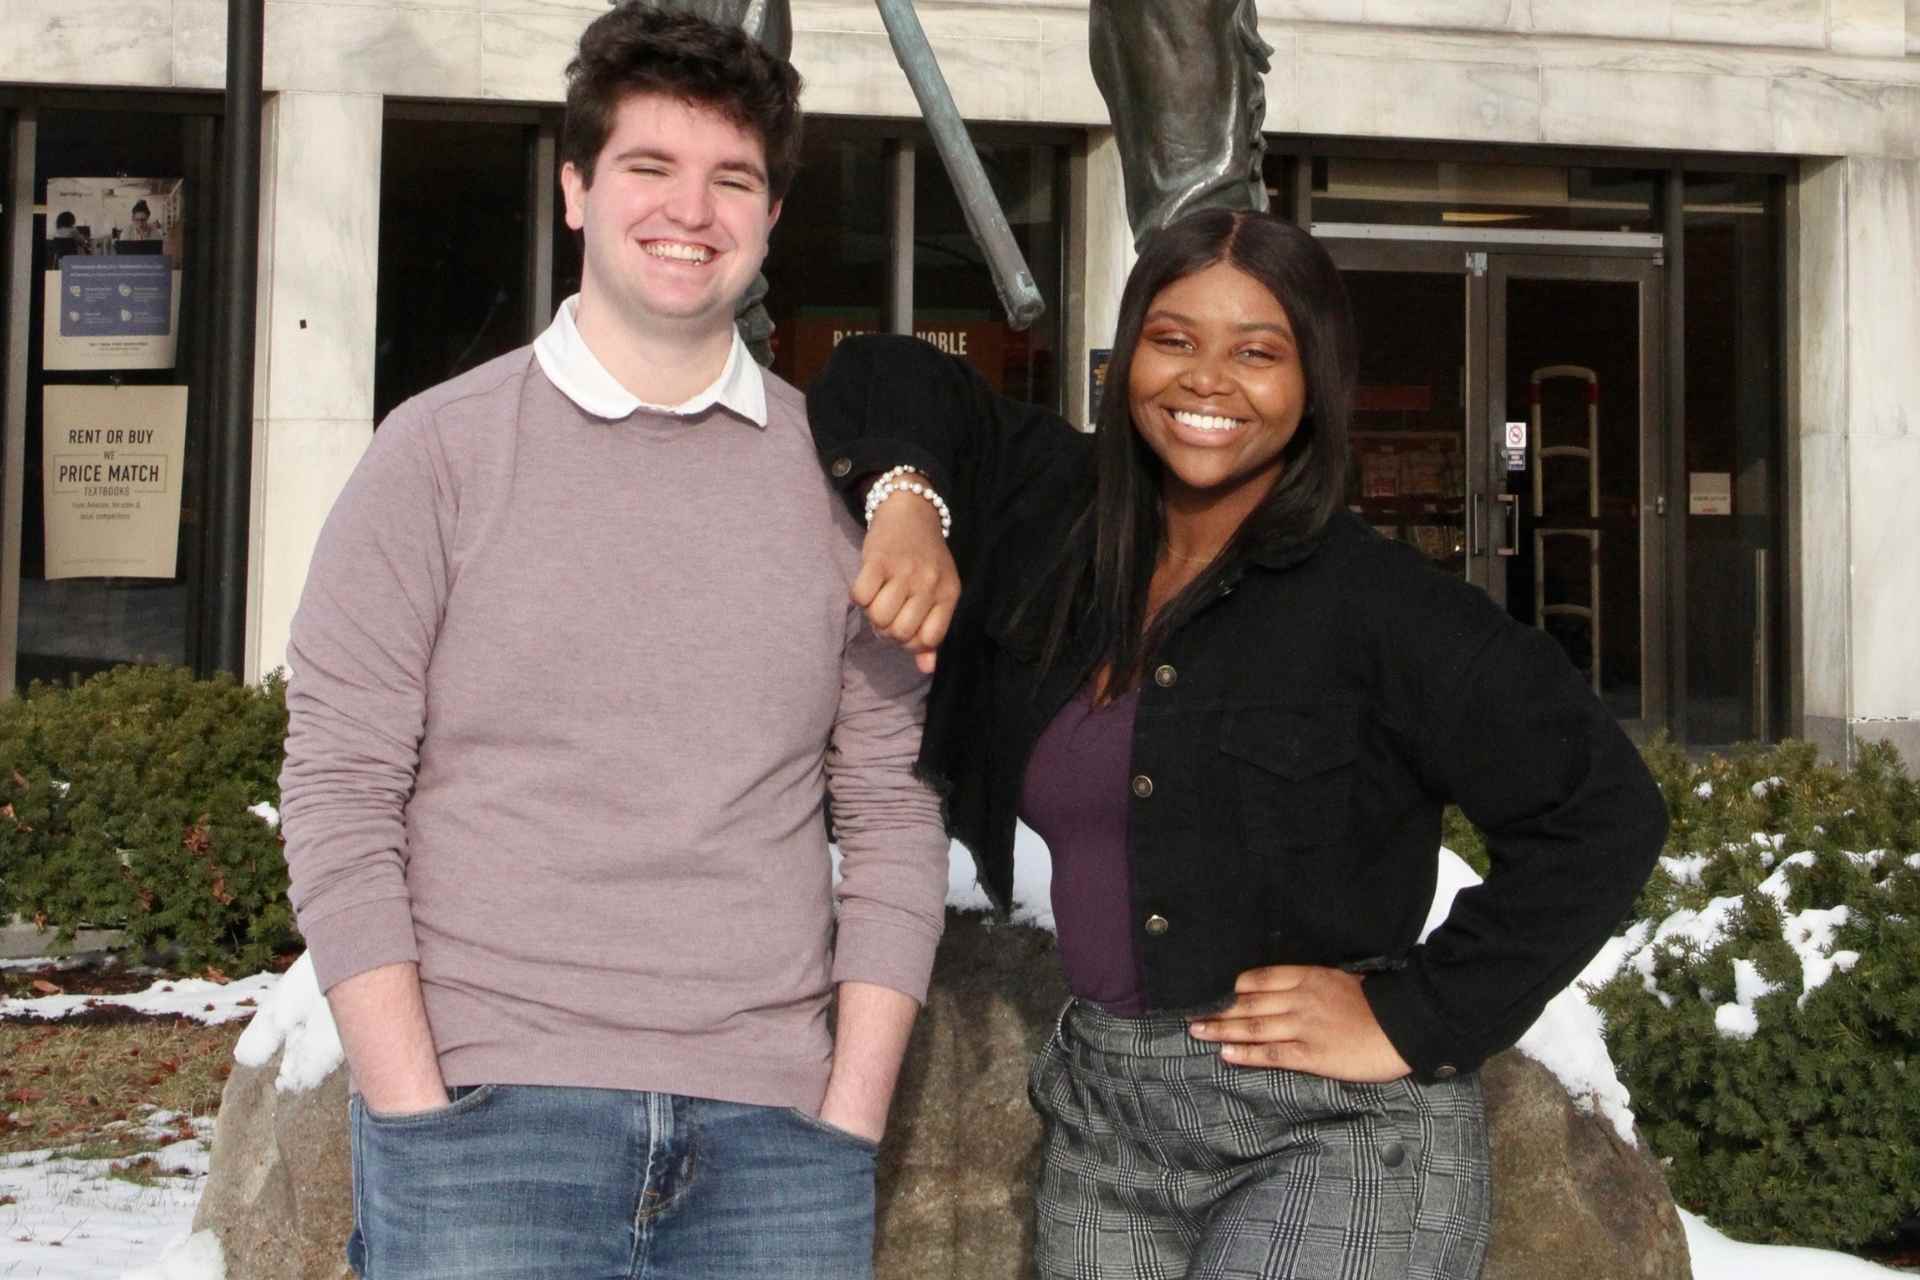 Elected: Hunter Moore is the new vice president and Amaya Jernigan is the first Black woman president of the WVU Student Government Association. (WVU Photo)